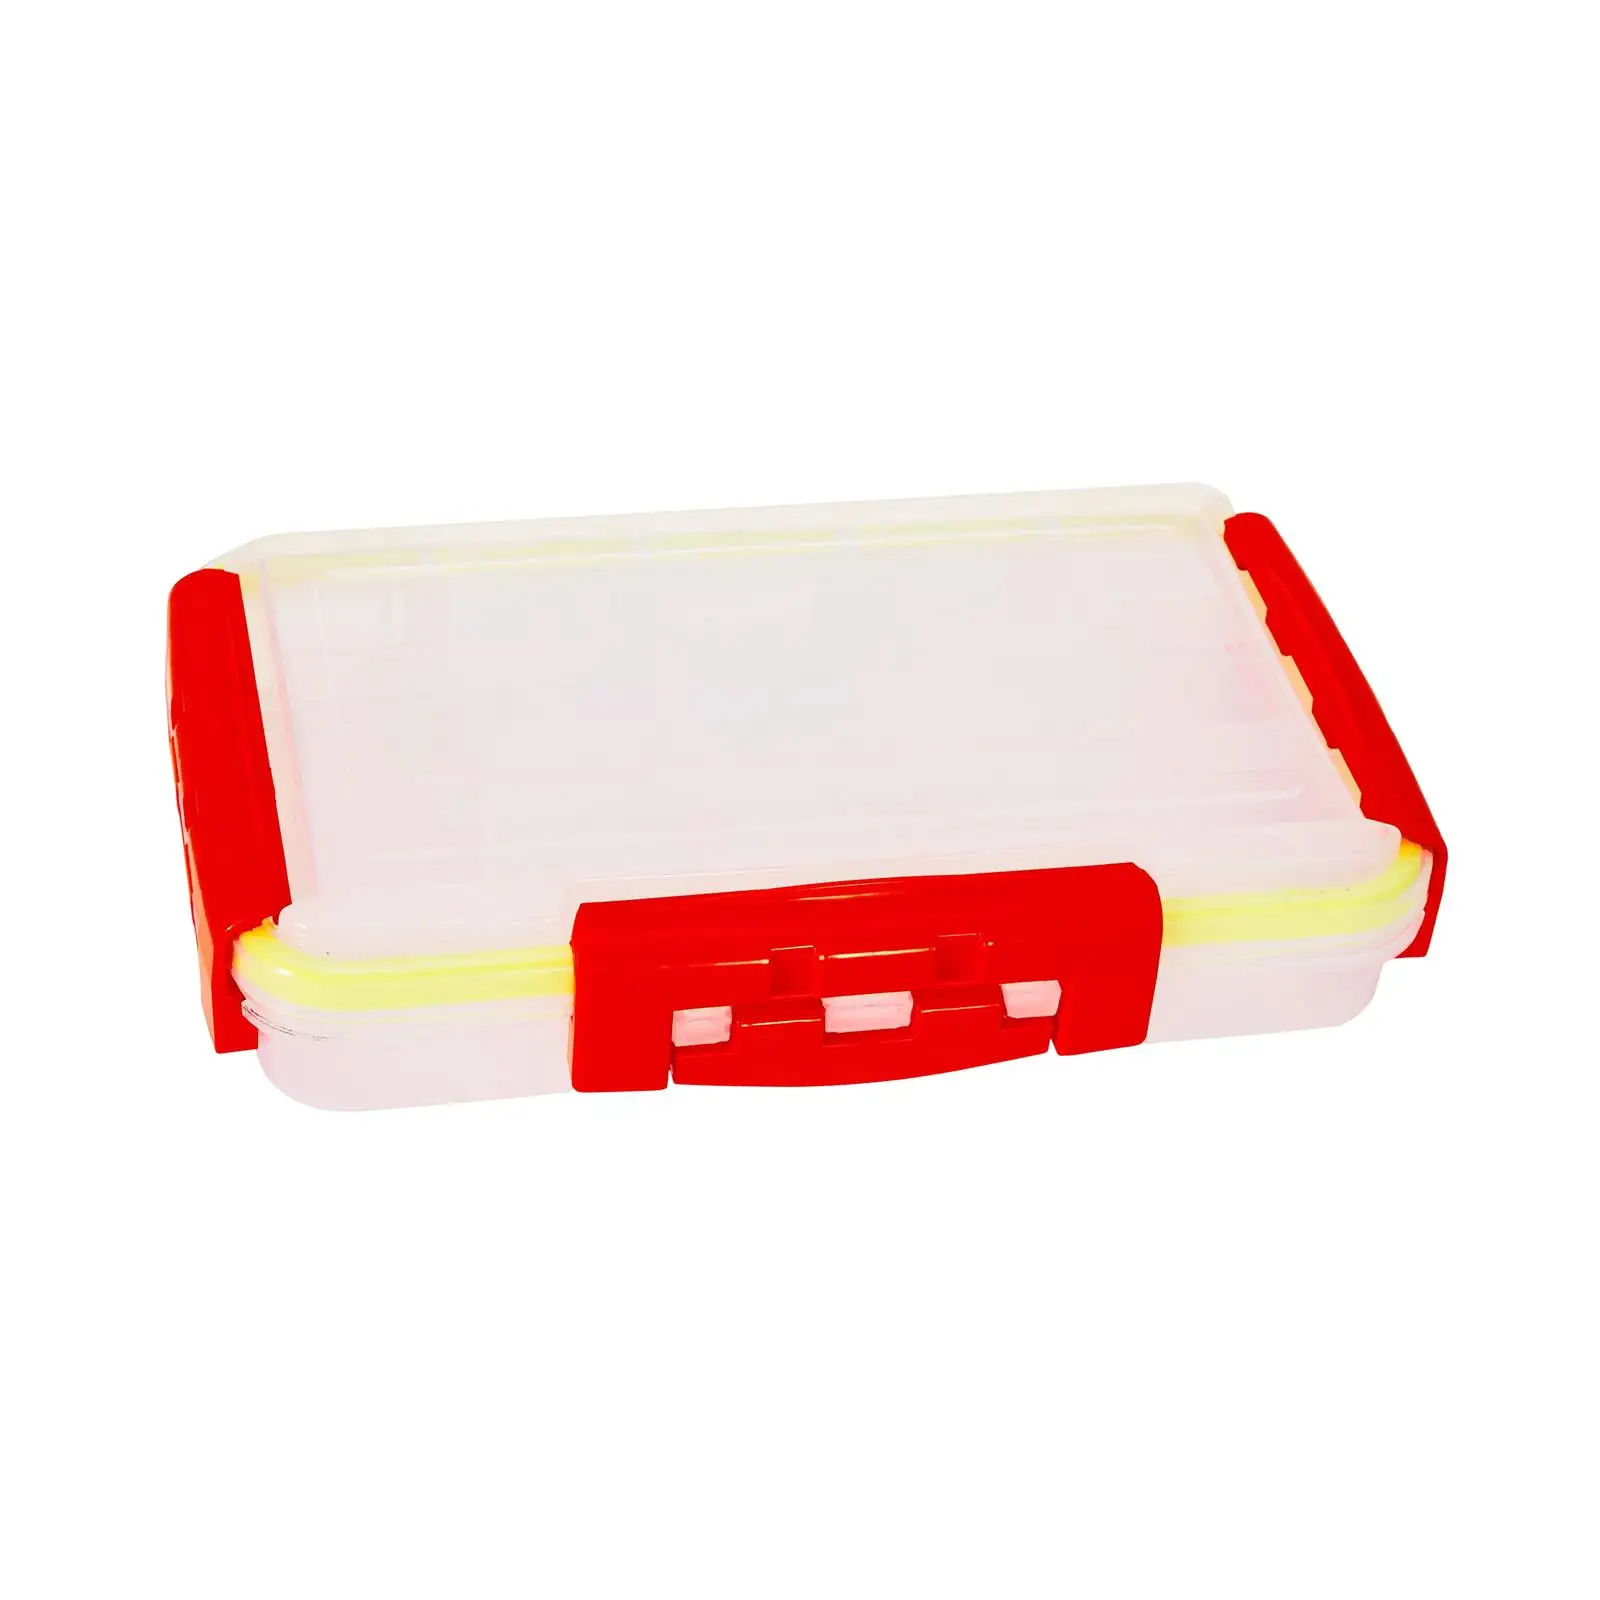 Fishing Tackle Box Organizer Fishing Lure Box Organizer Clear Lid with Removable Compartments